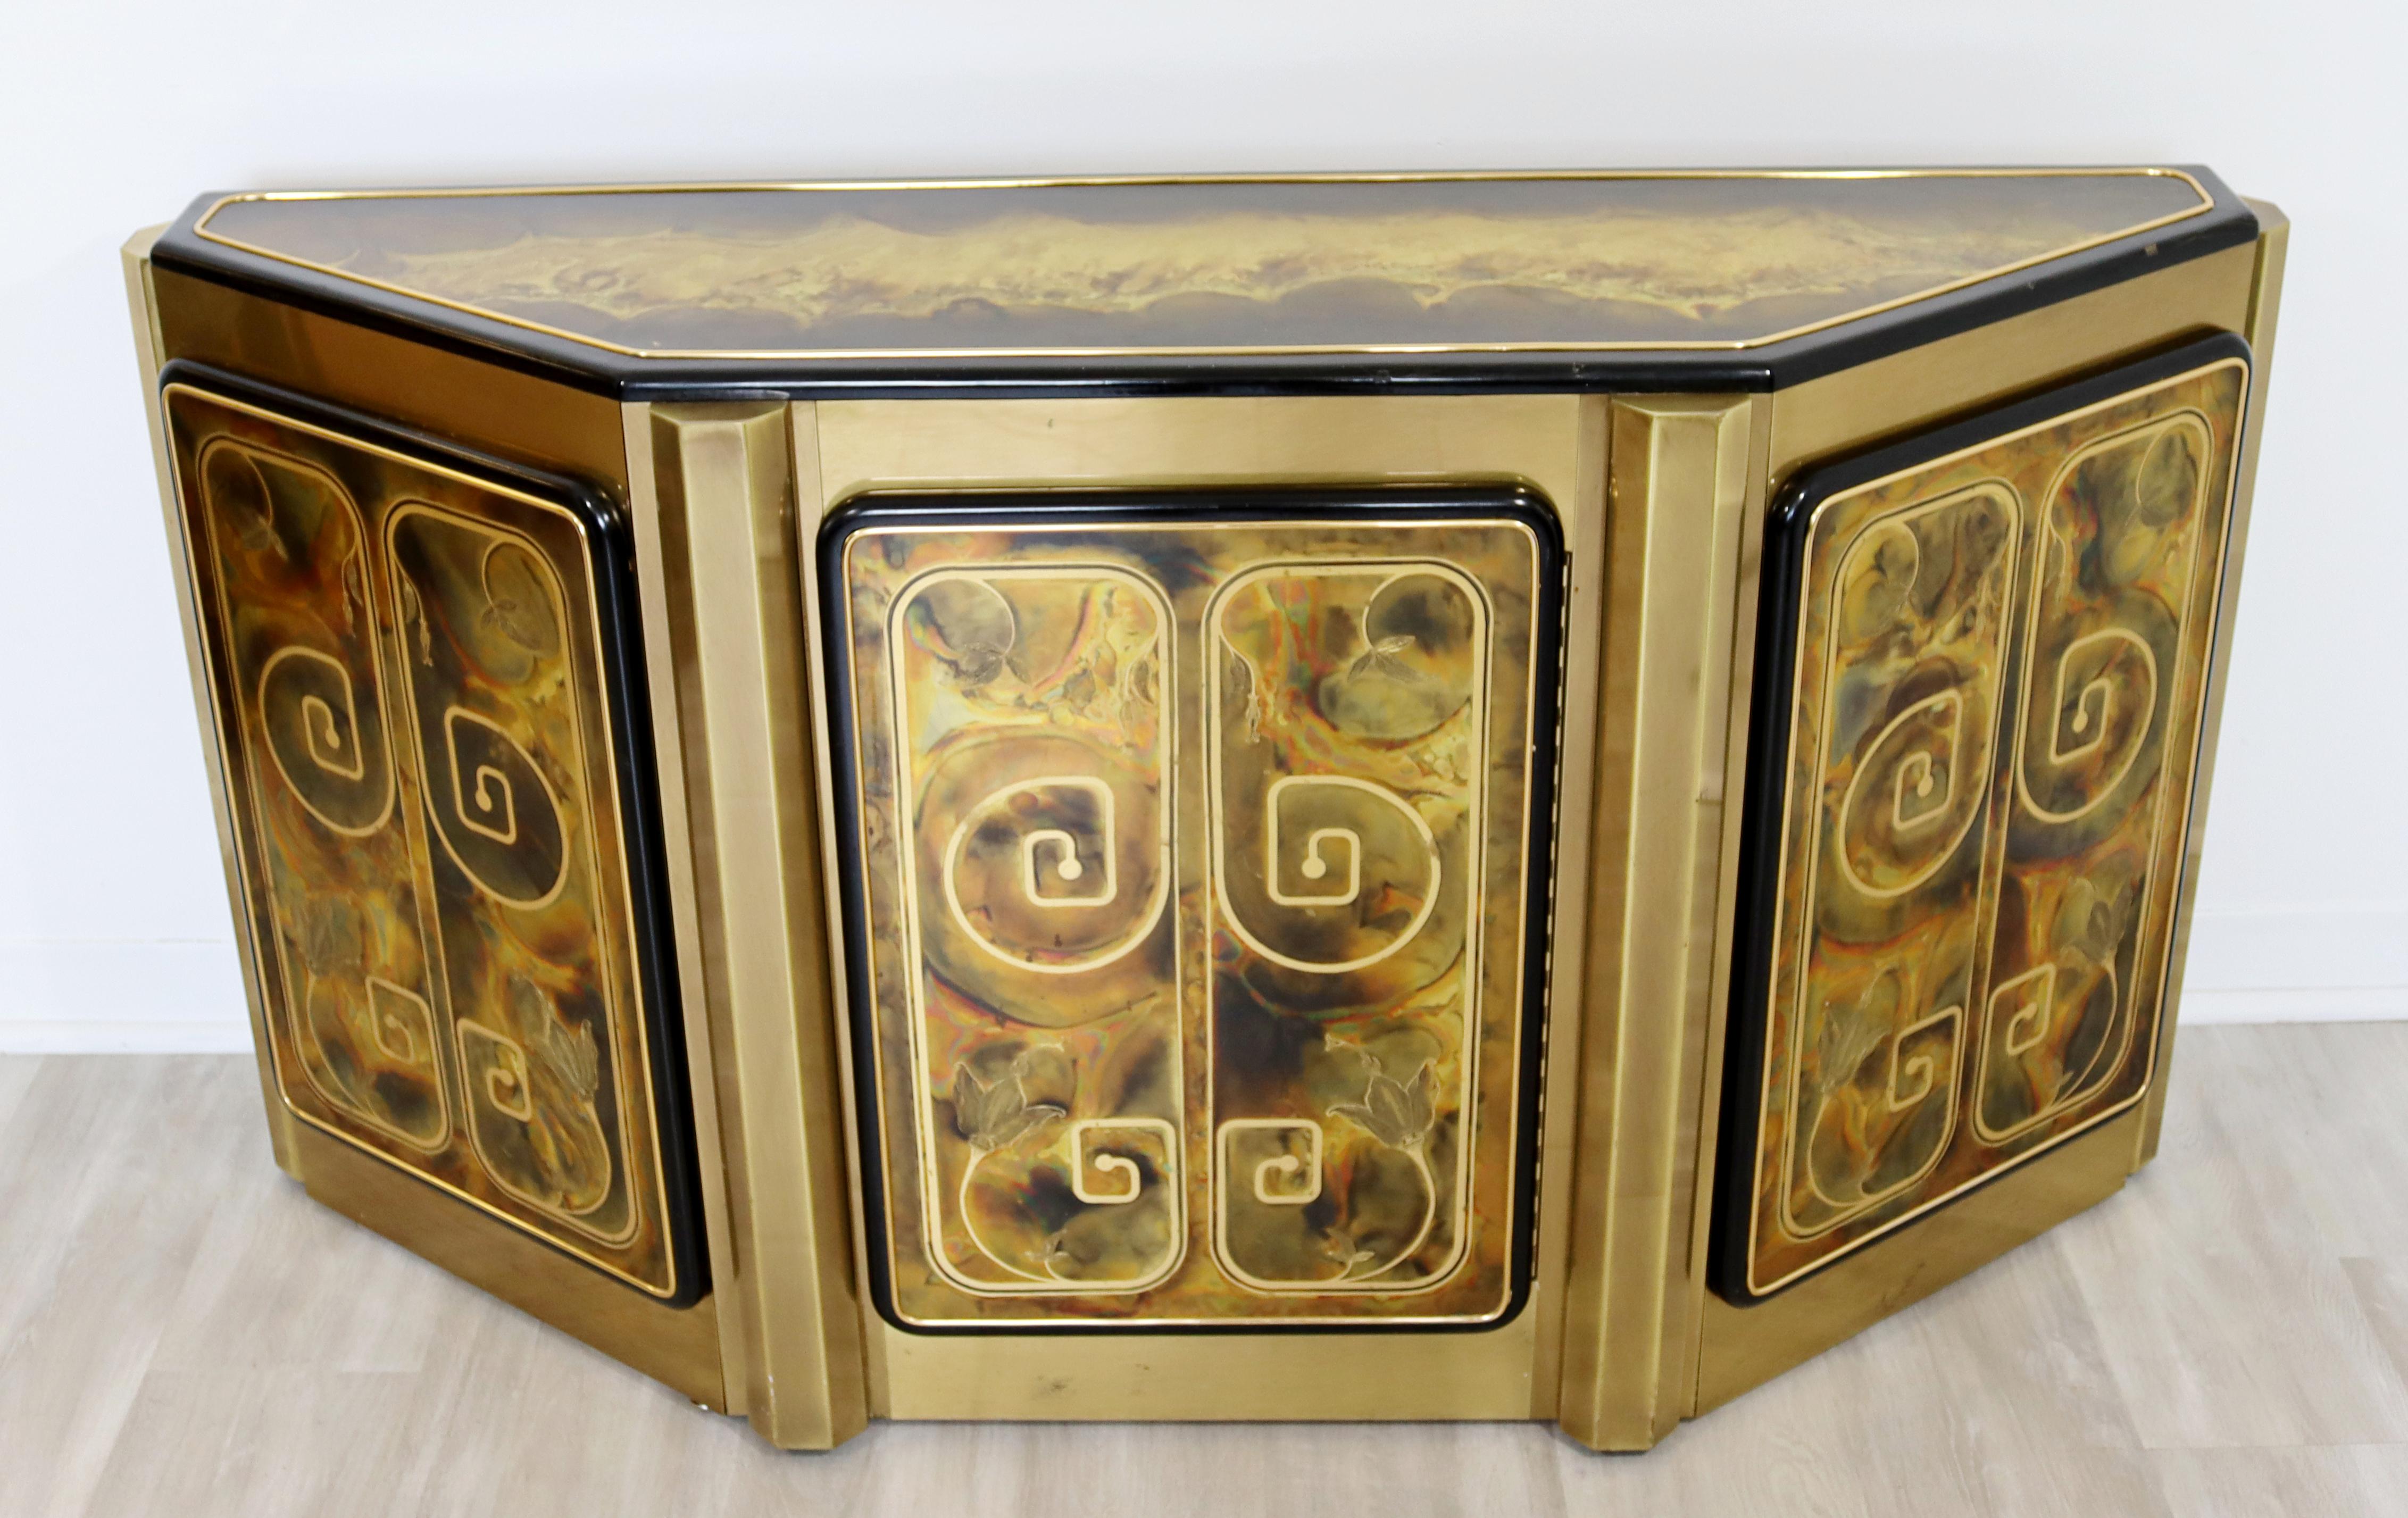 For your consideration is an astonishing, acid etched brass credenza, with one shelf, by Bernard Rohne for Mastercraft, circa the 1960s. In very good vintage condition. The dimensions are 54